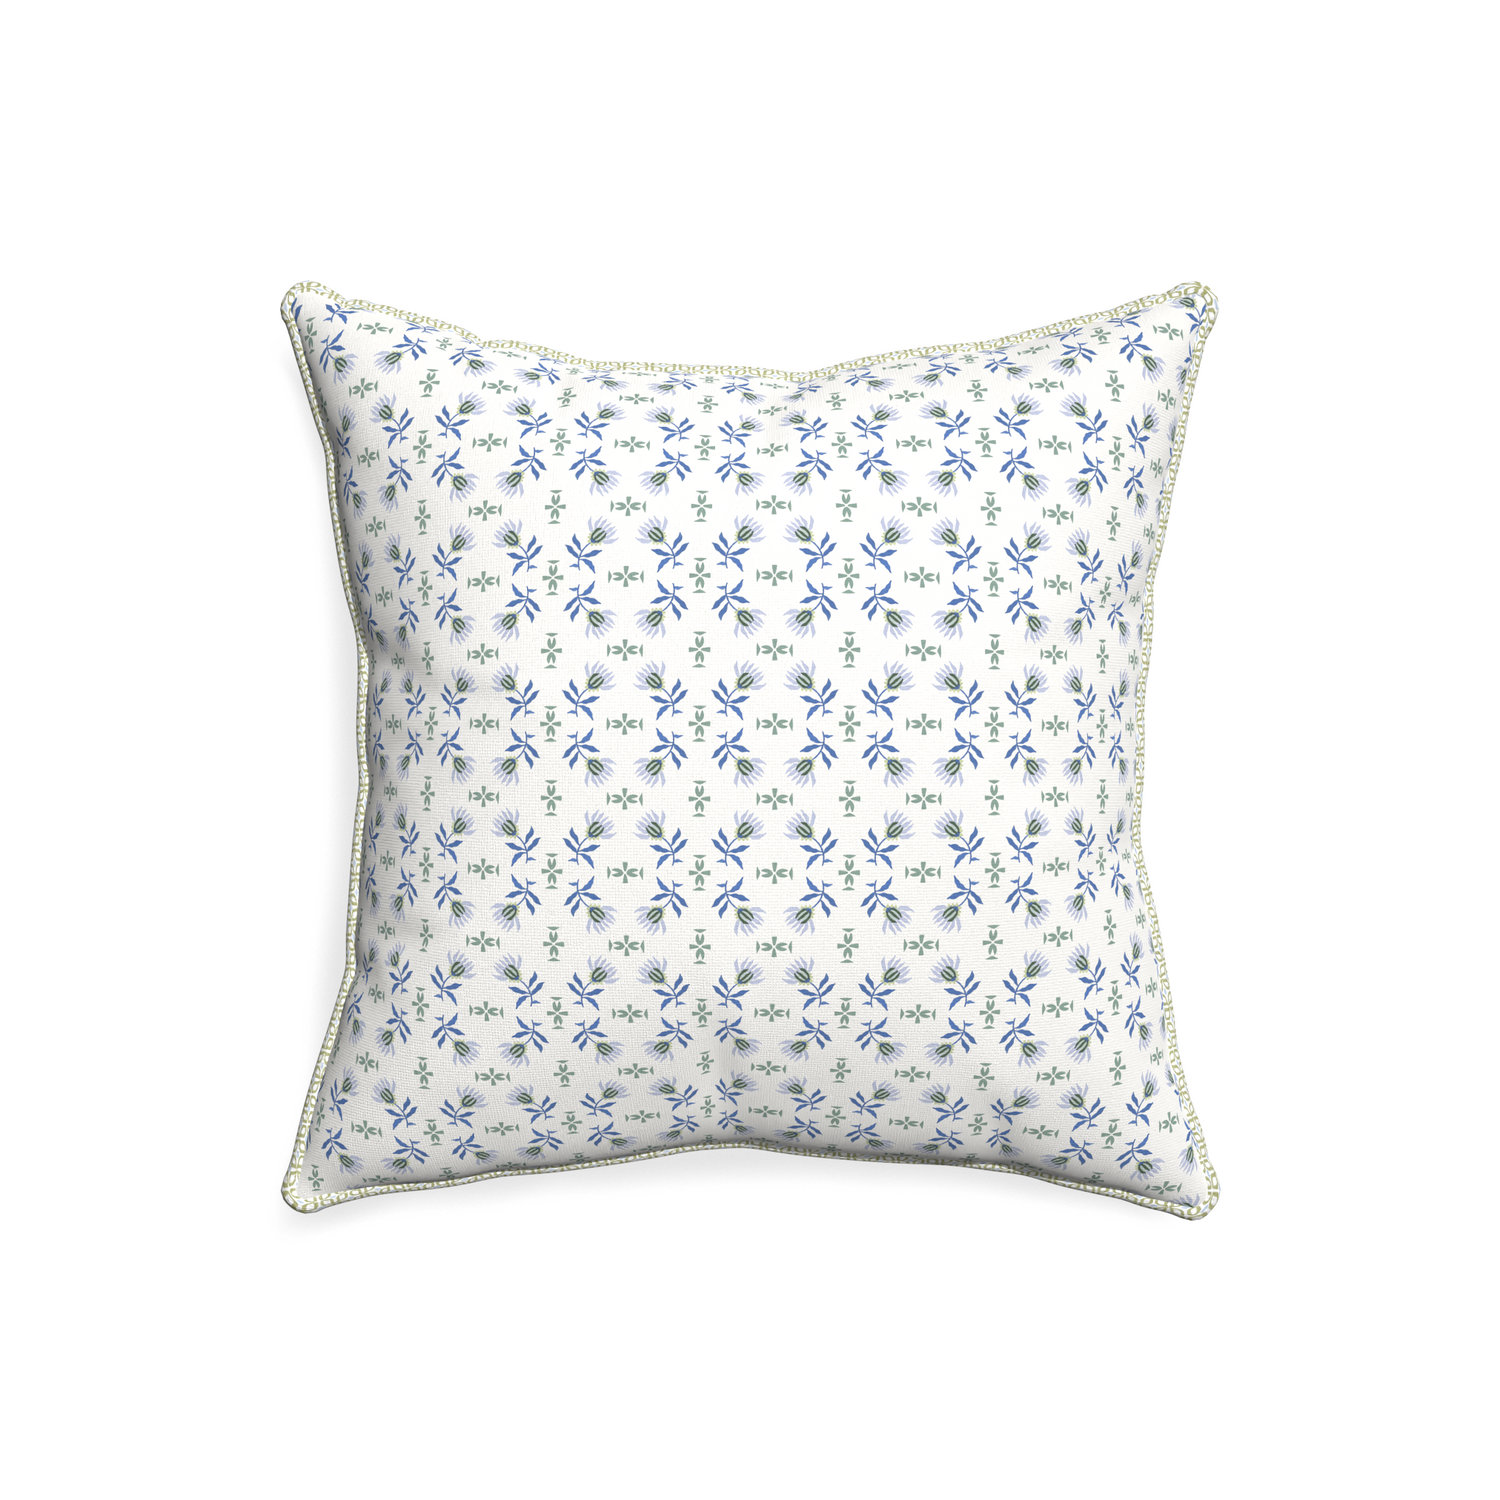 20-square lee custom pillow with l piping on white background